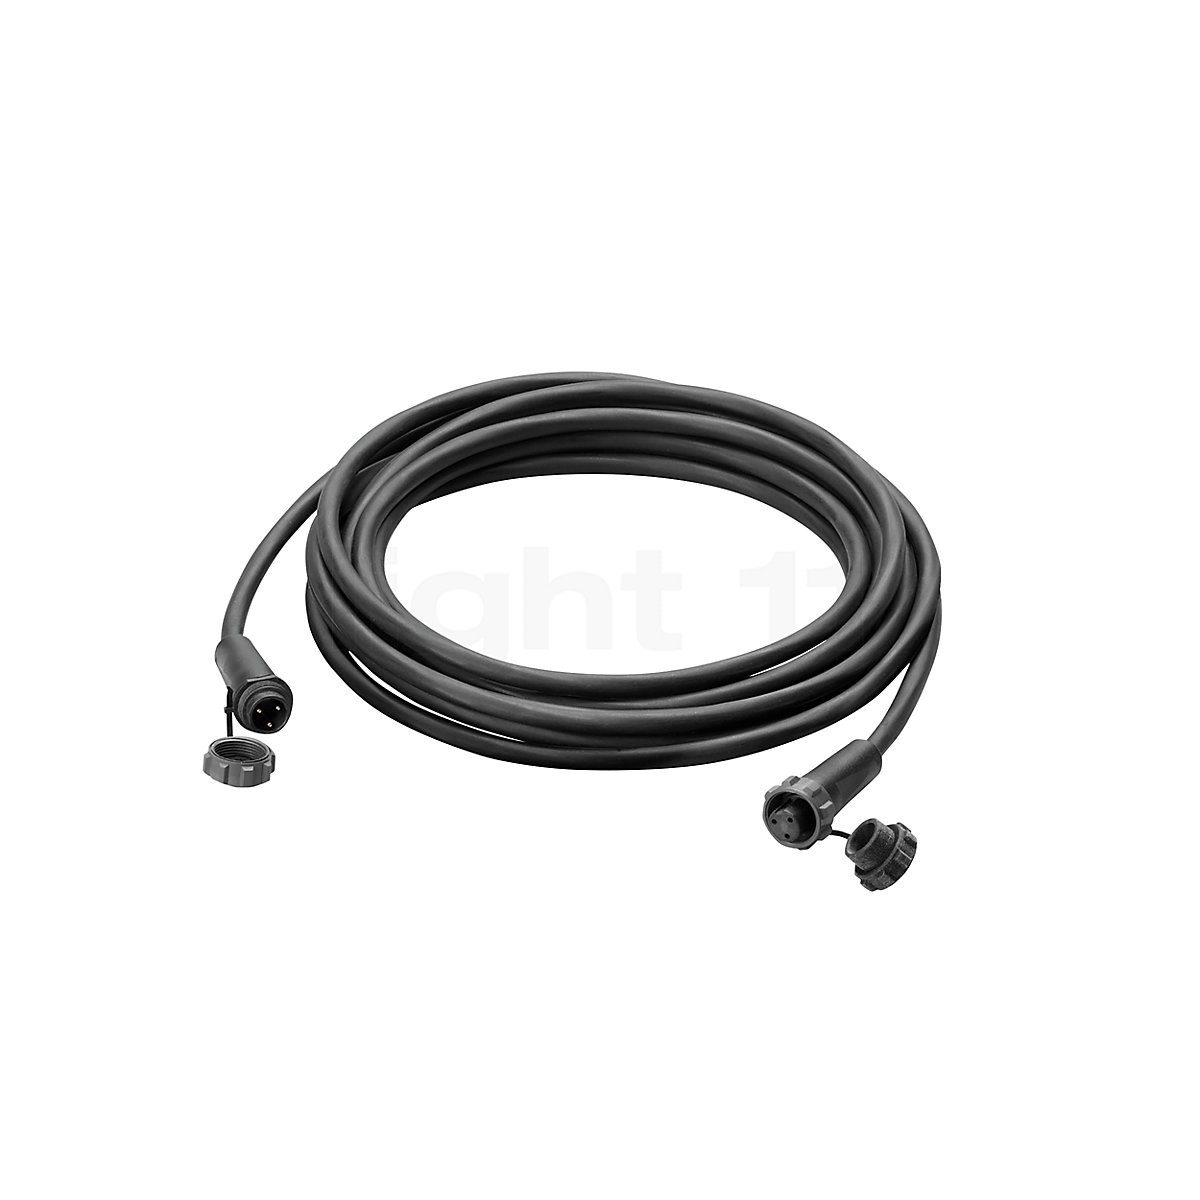 Buy Bega 71186 - UniLink® Extension Cable at